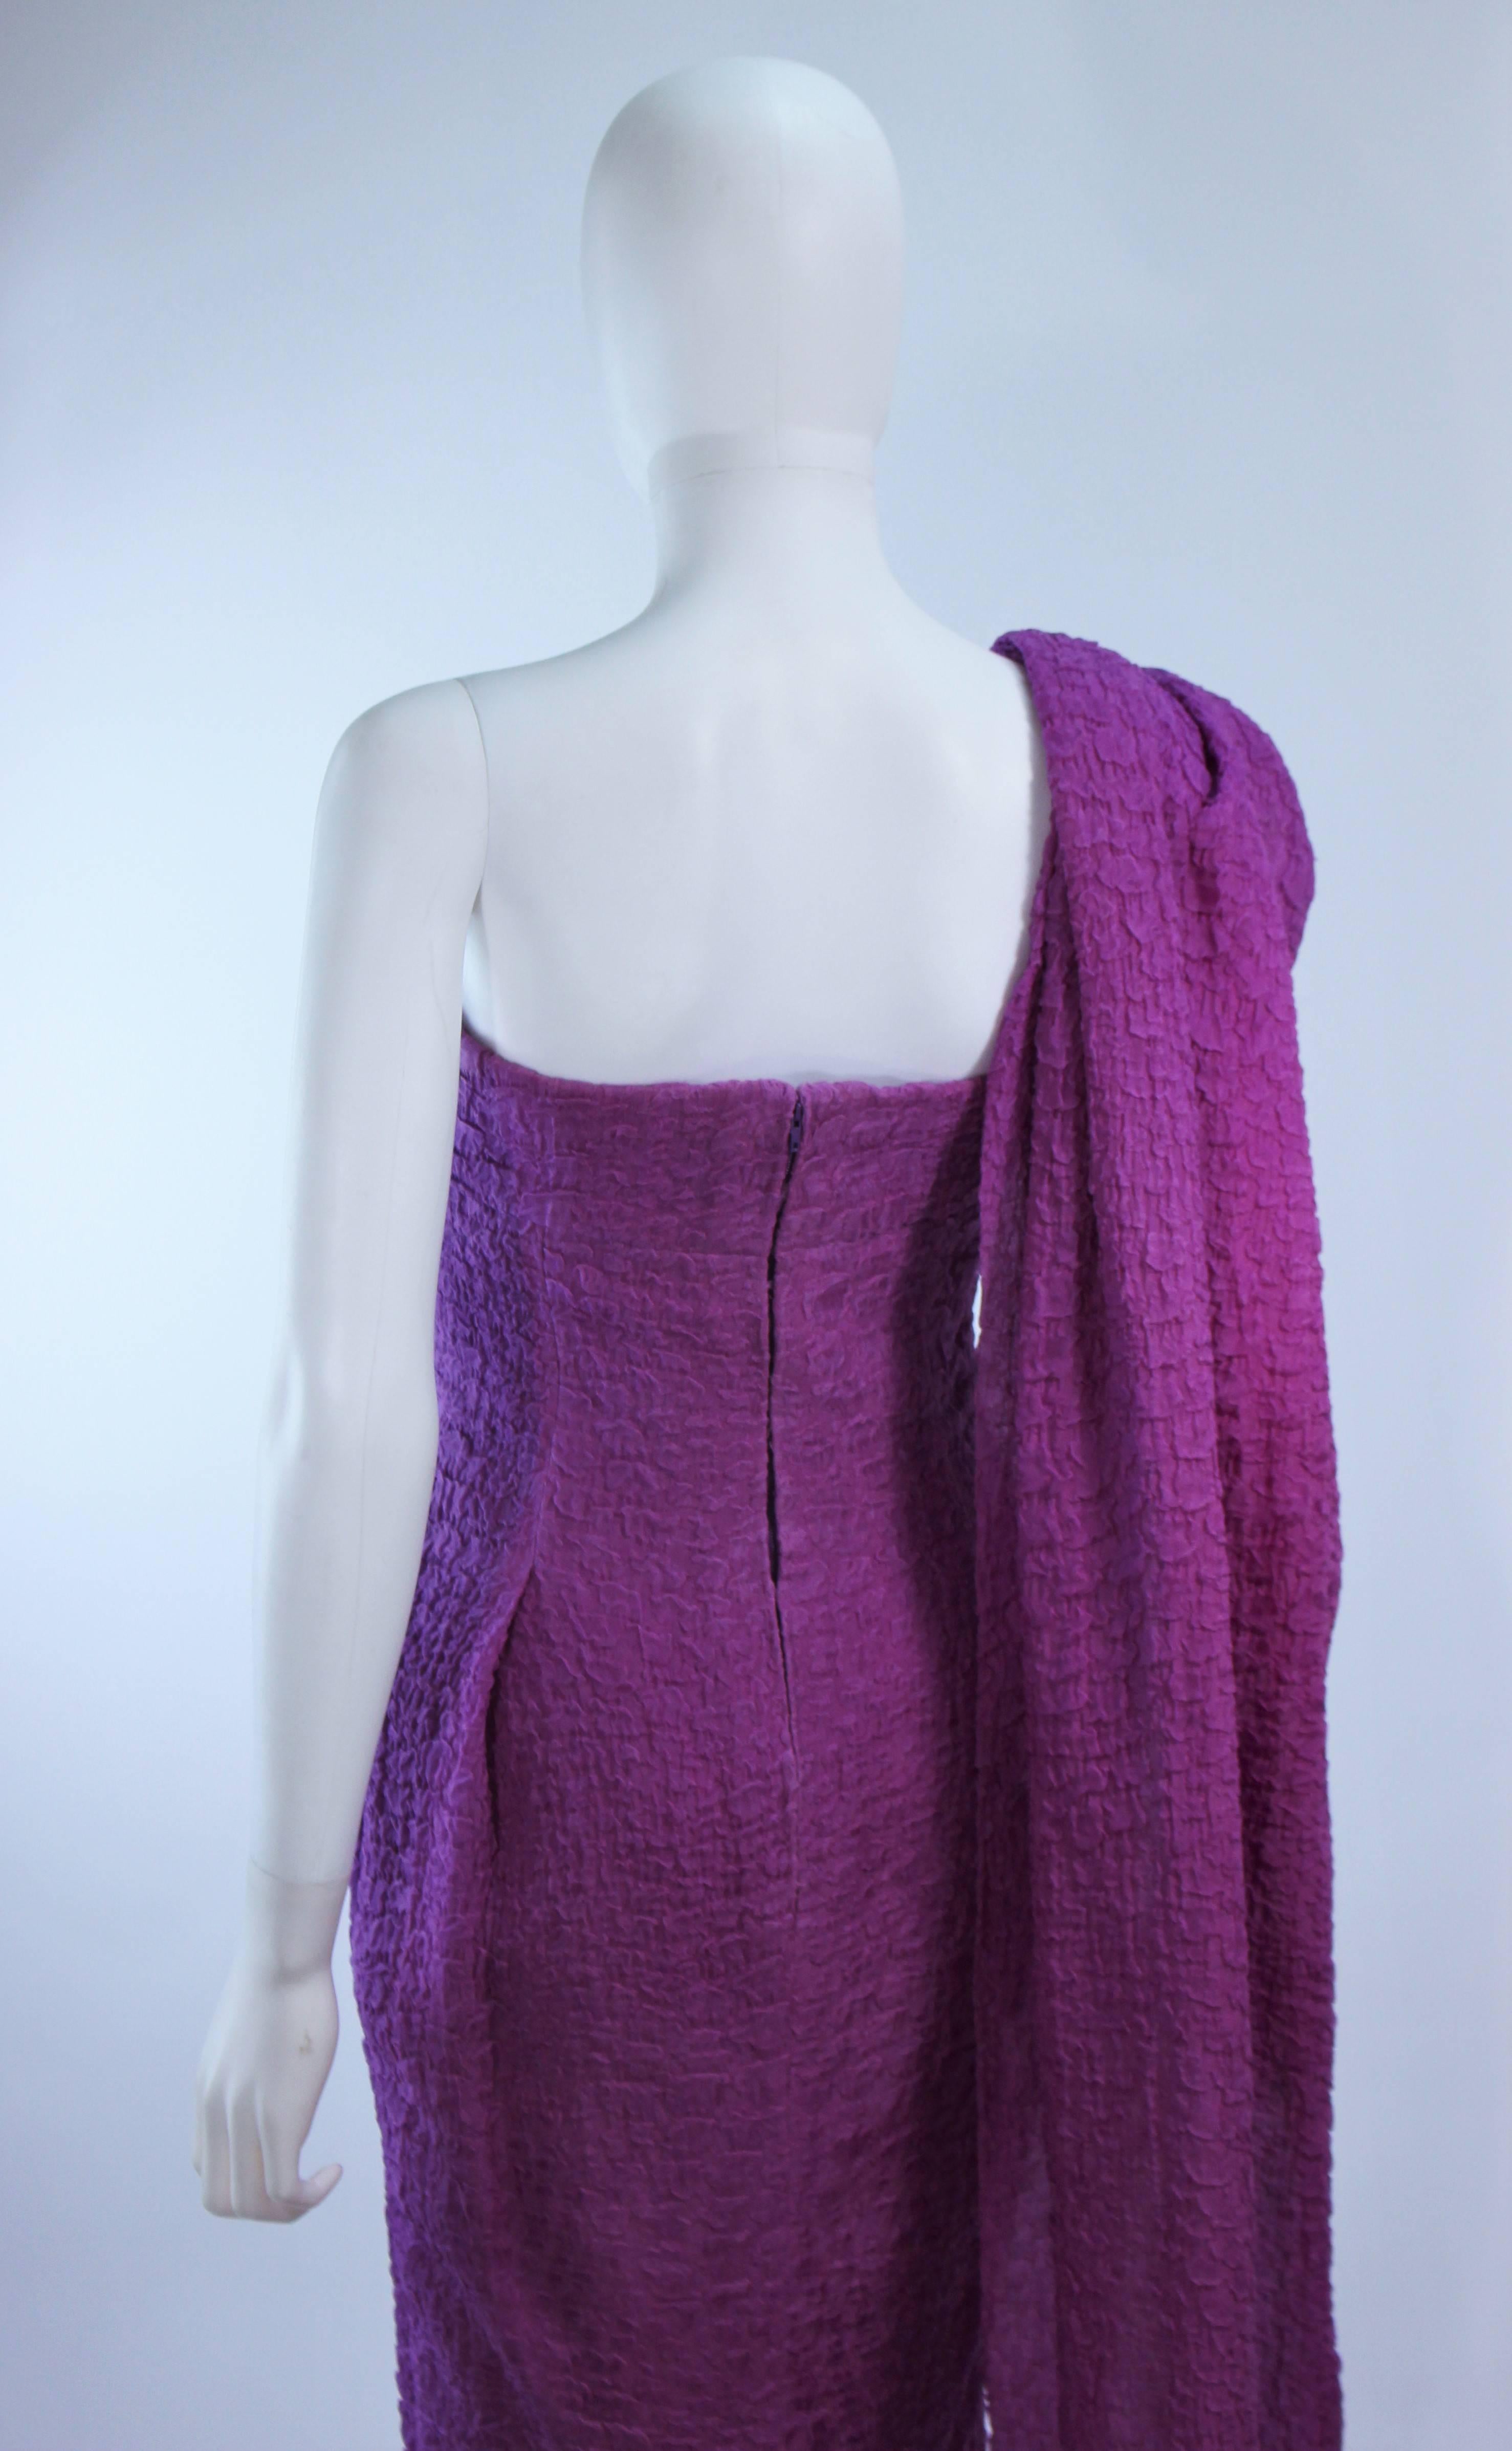 CHRISTIAN DIOR HAUTE COUTURE Purple Crinkle Gown Betsy Bloomingdale 1988 2